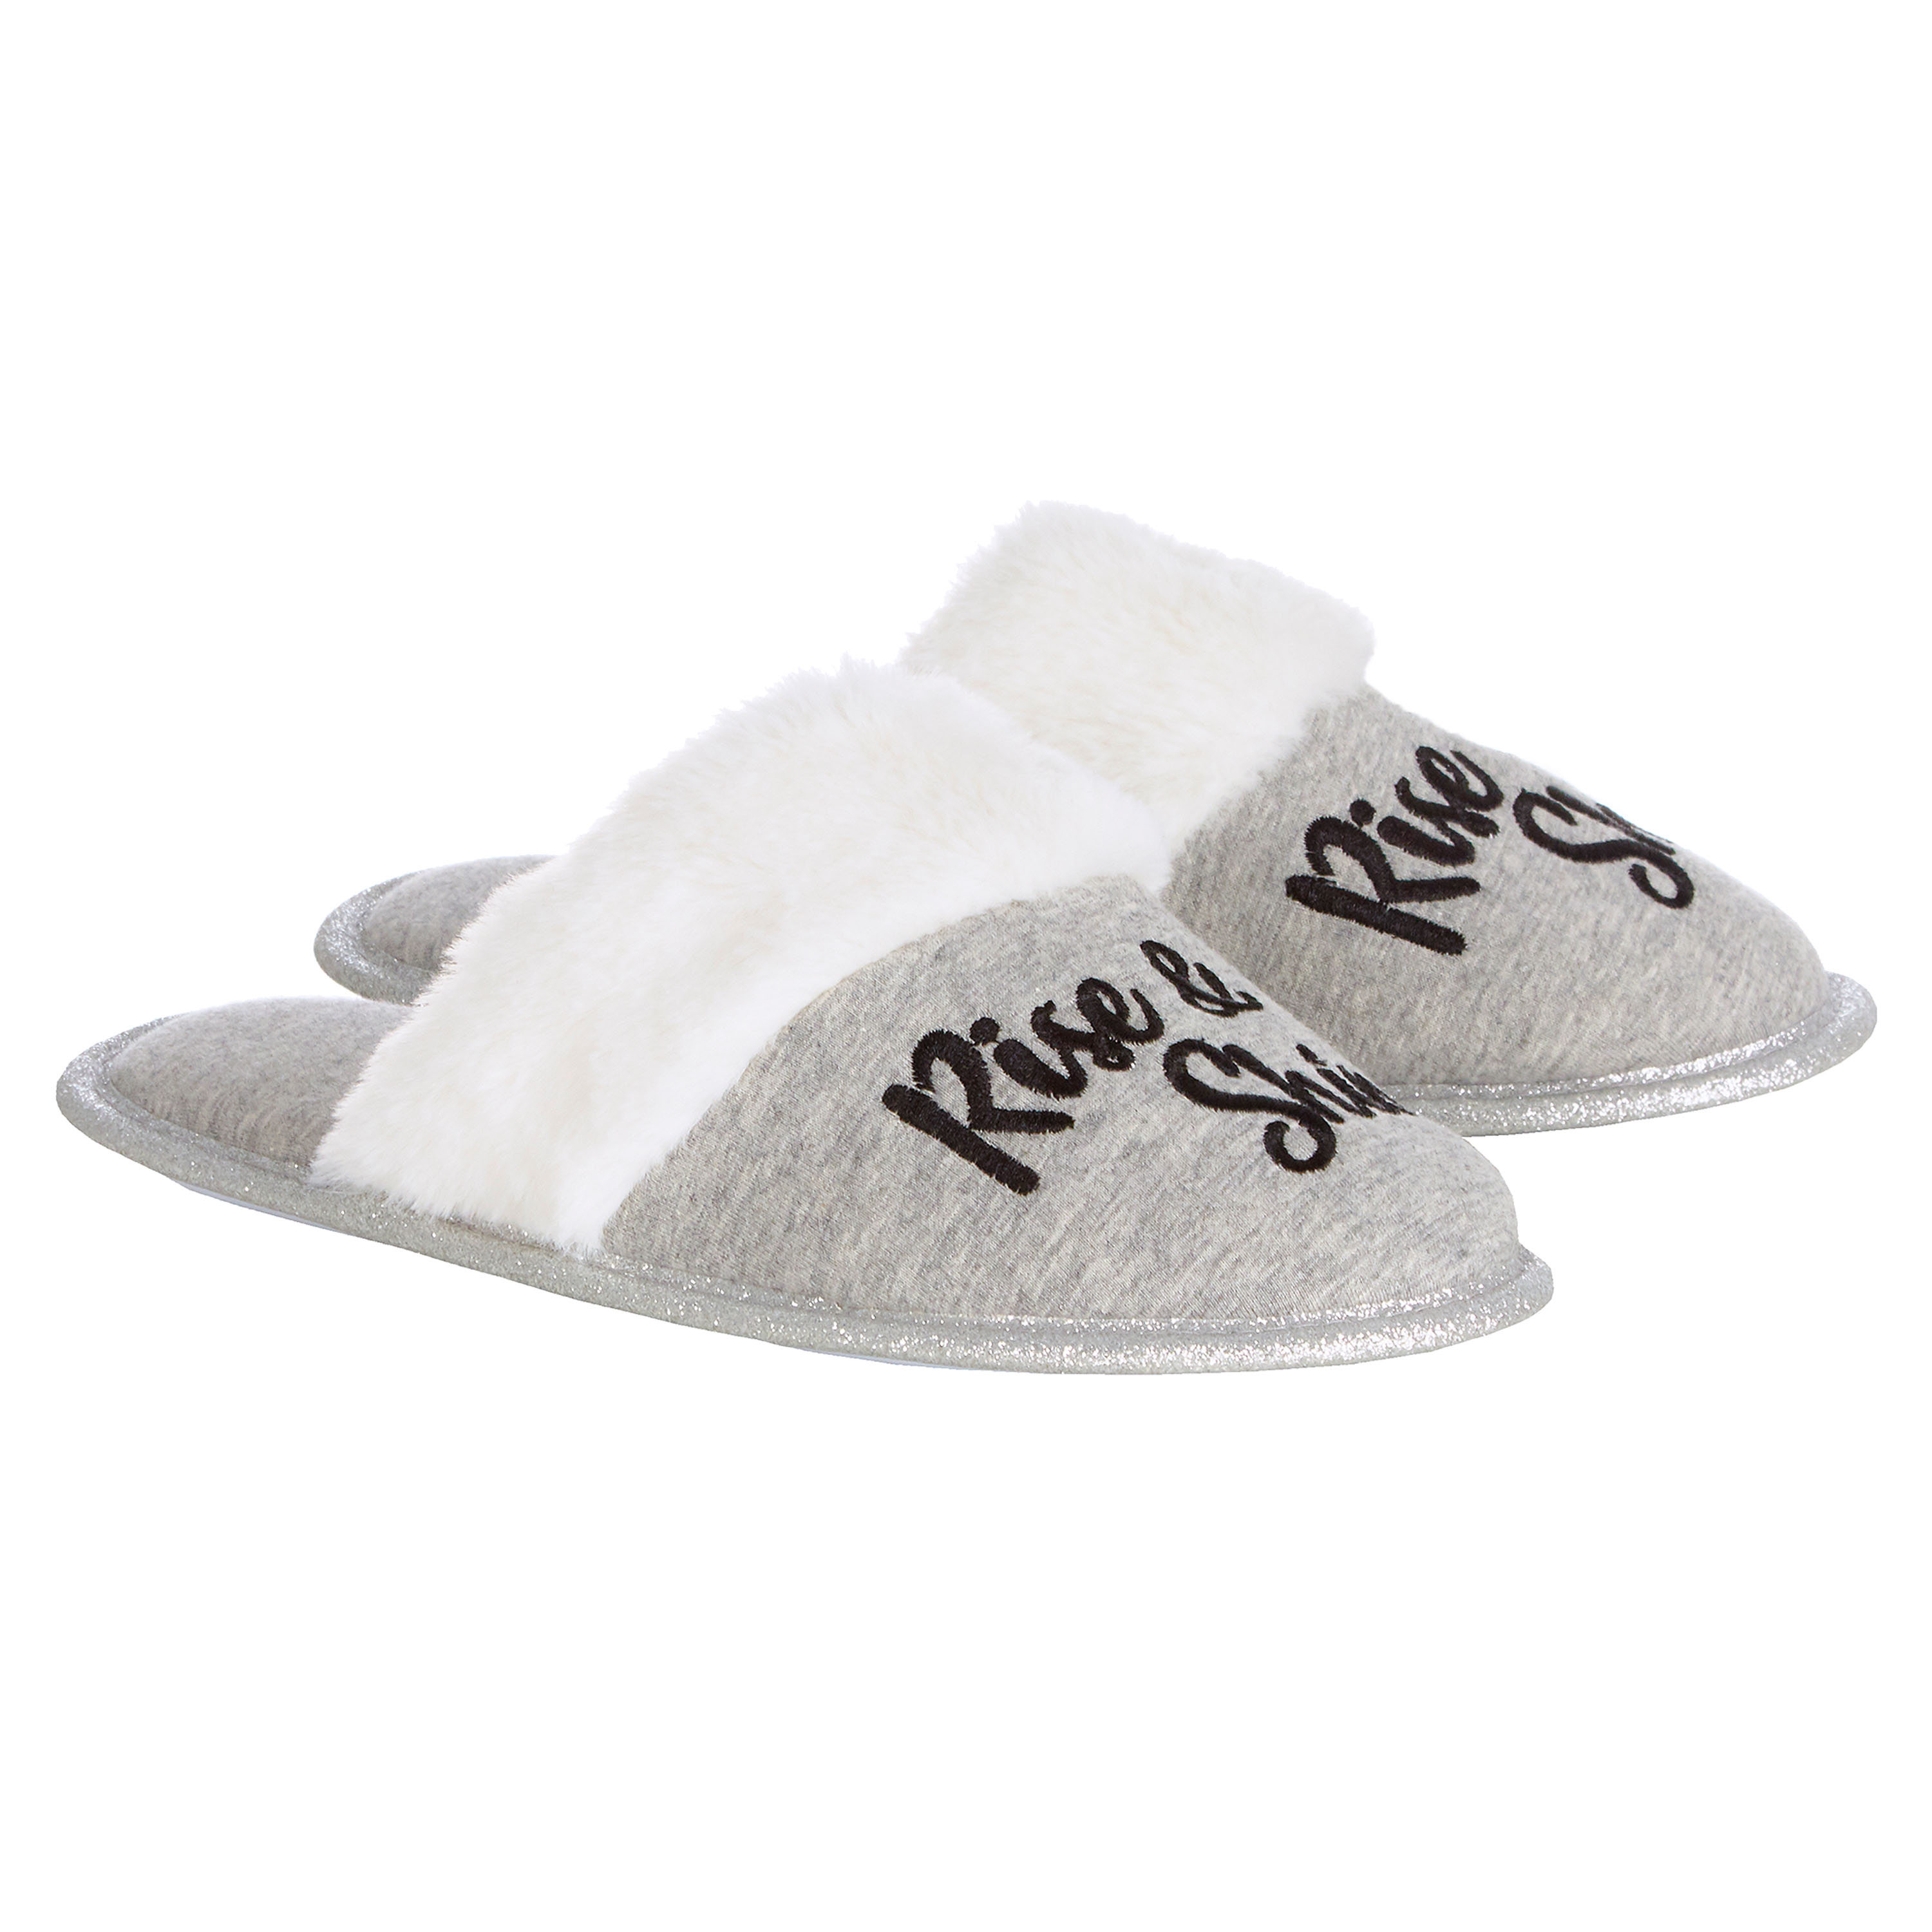 Ladies Shimmering House Mule Slippers Embroidered Fluffy Warm Slip On ...